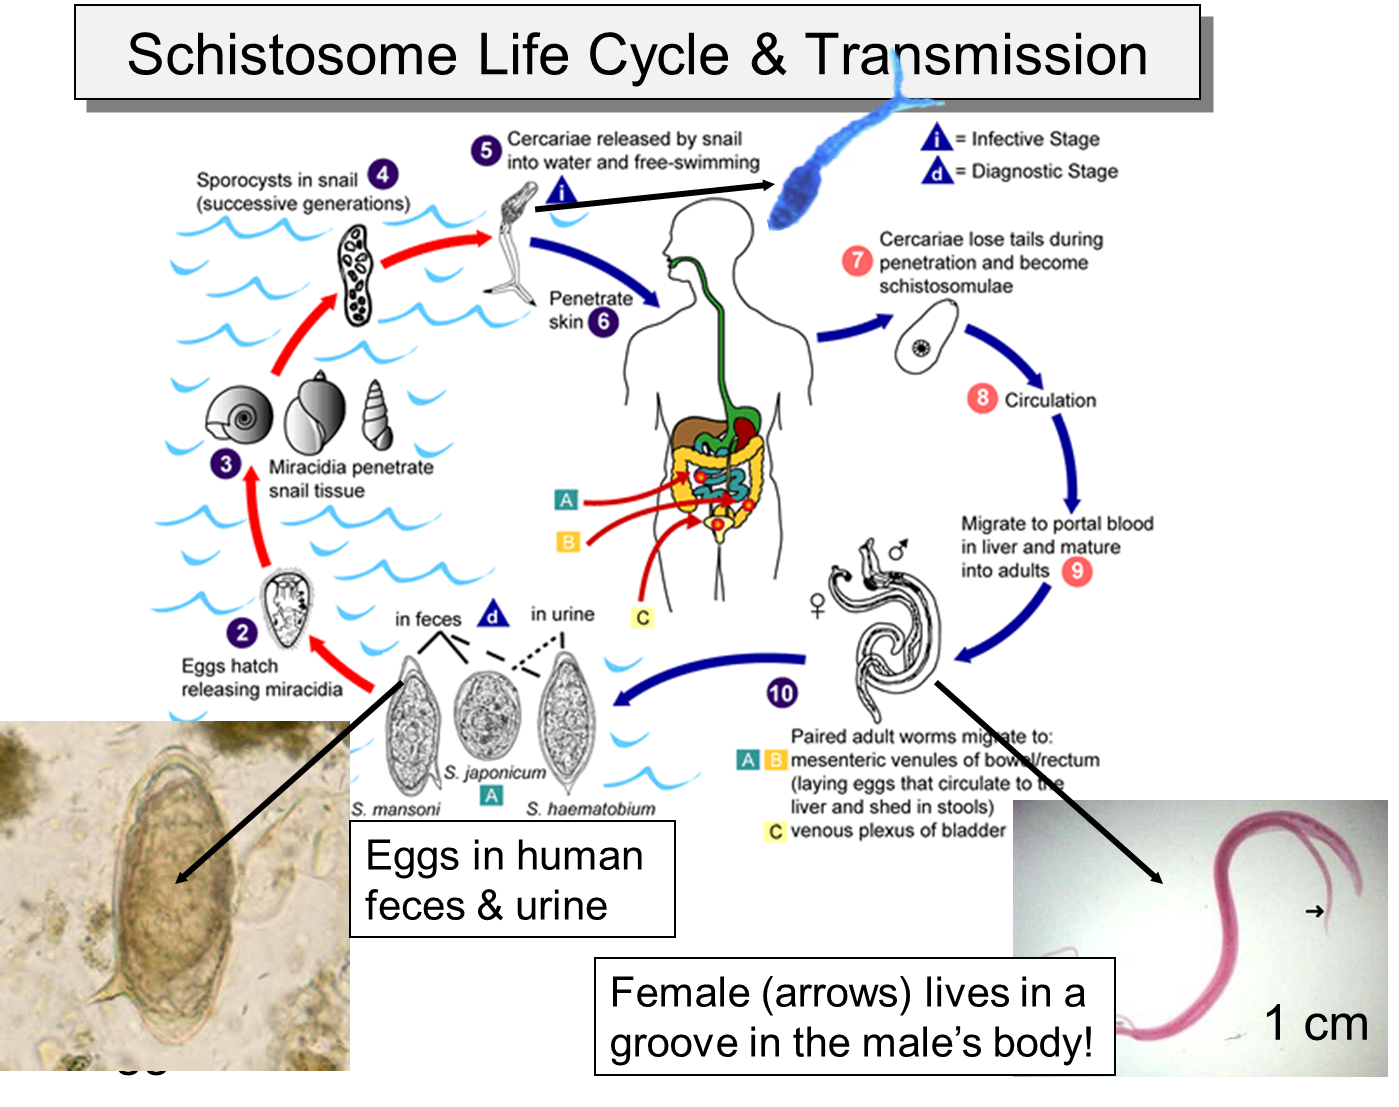 Schistosome Life Cycle.png